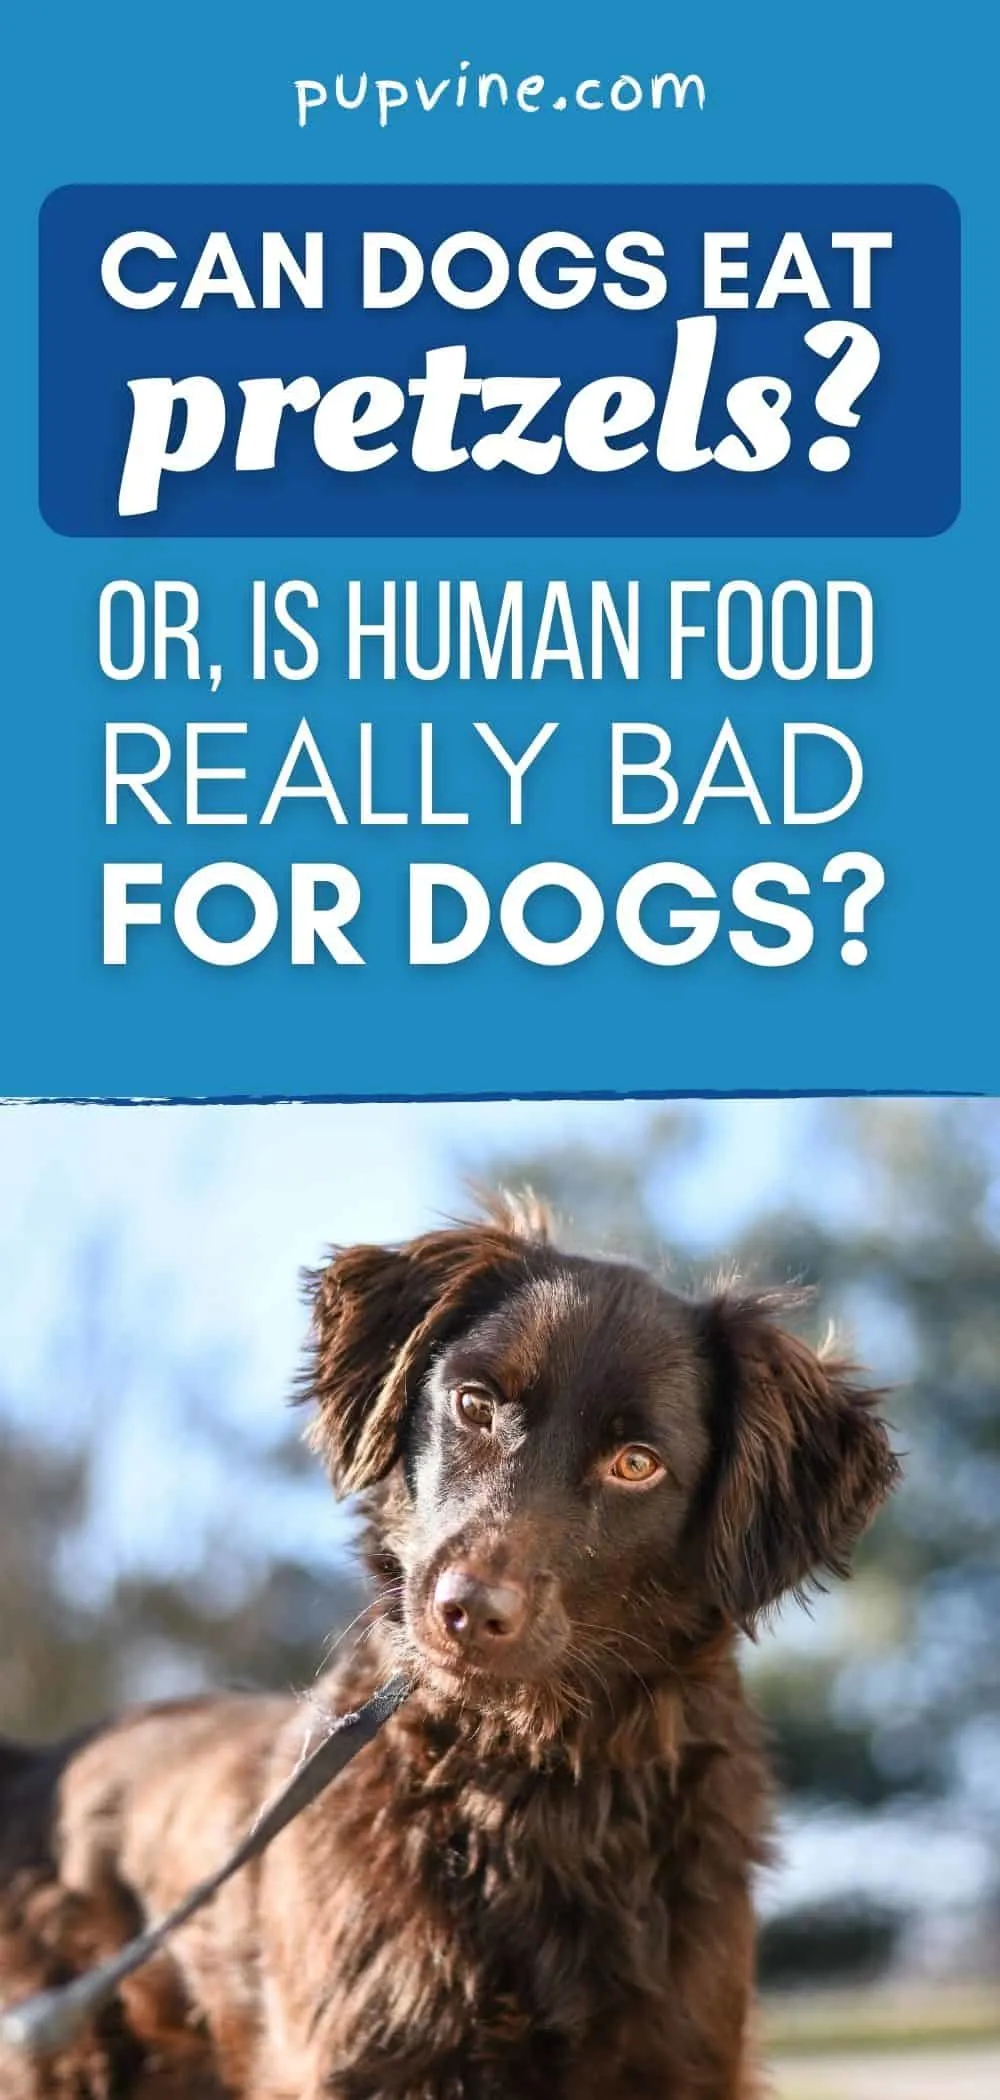 Can Dogs Eat Pretzels? Or, Is Human Food Really Bad For Dogs?